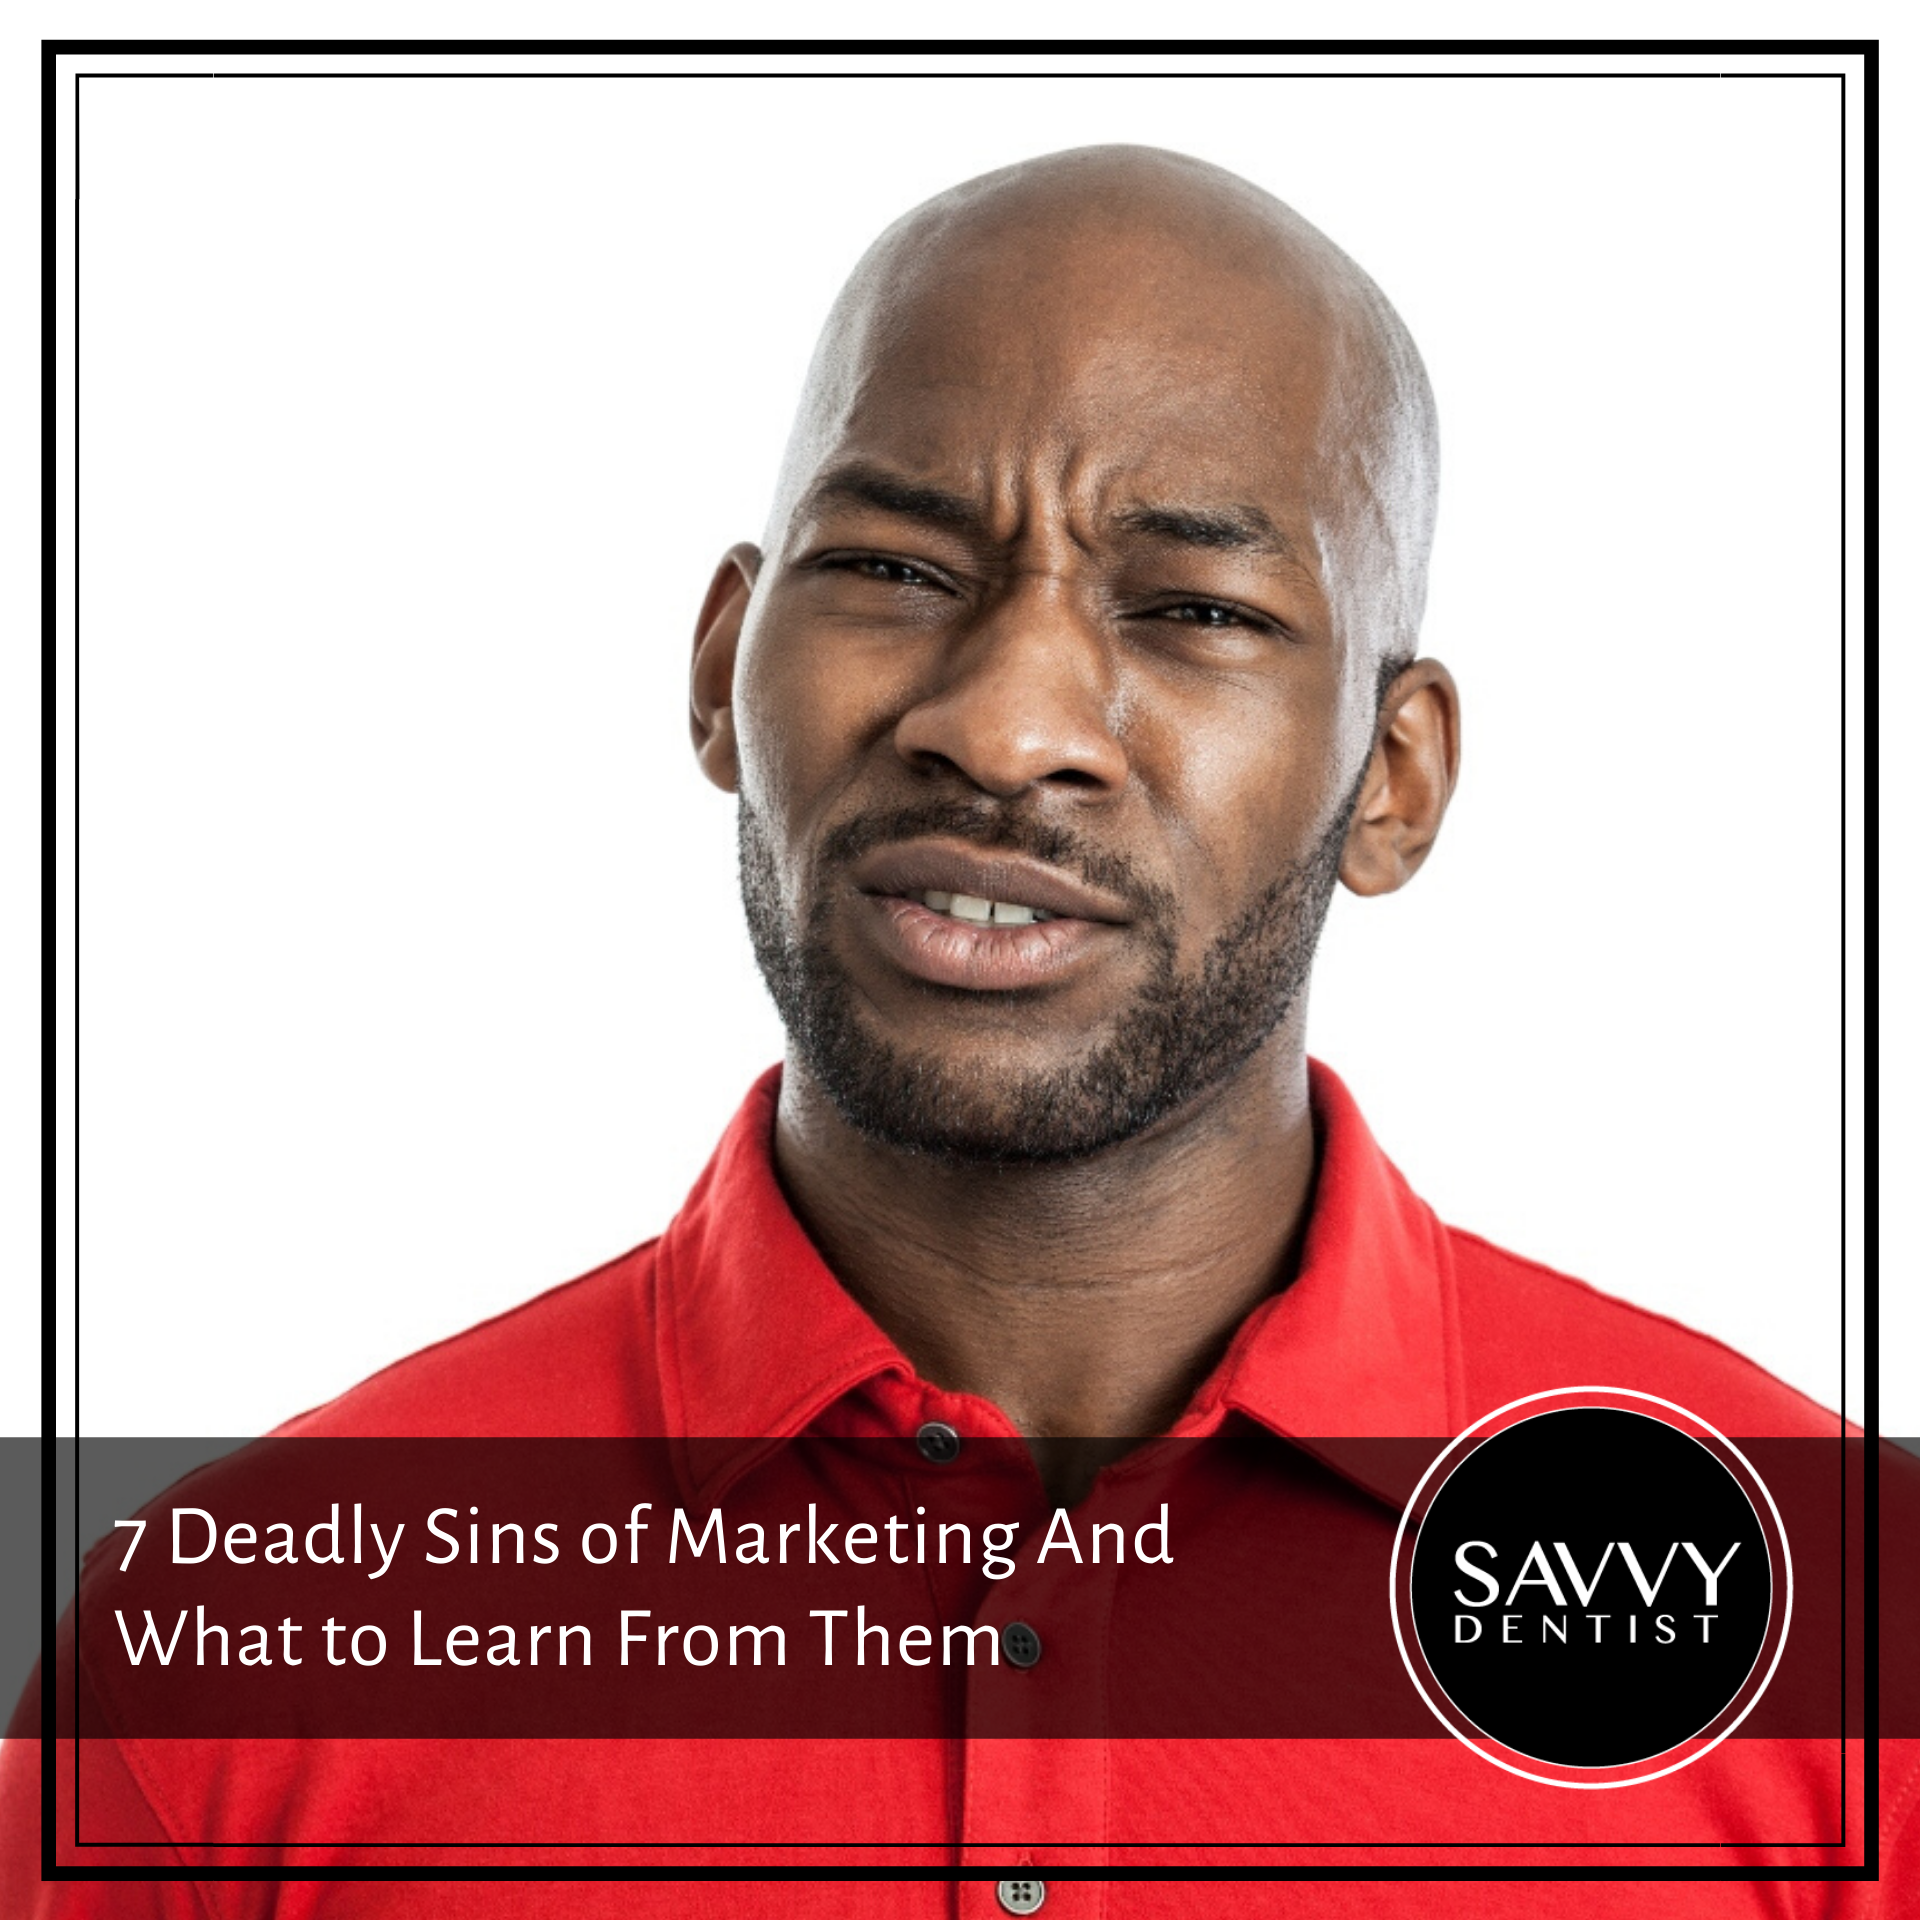 7 Deadly Sins of Marketing And What to Learn From Them